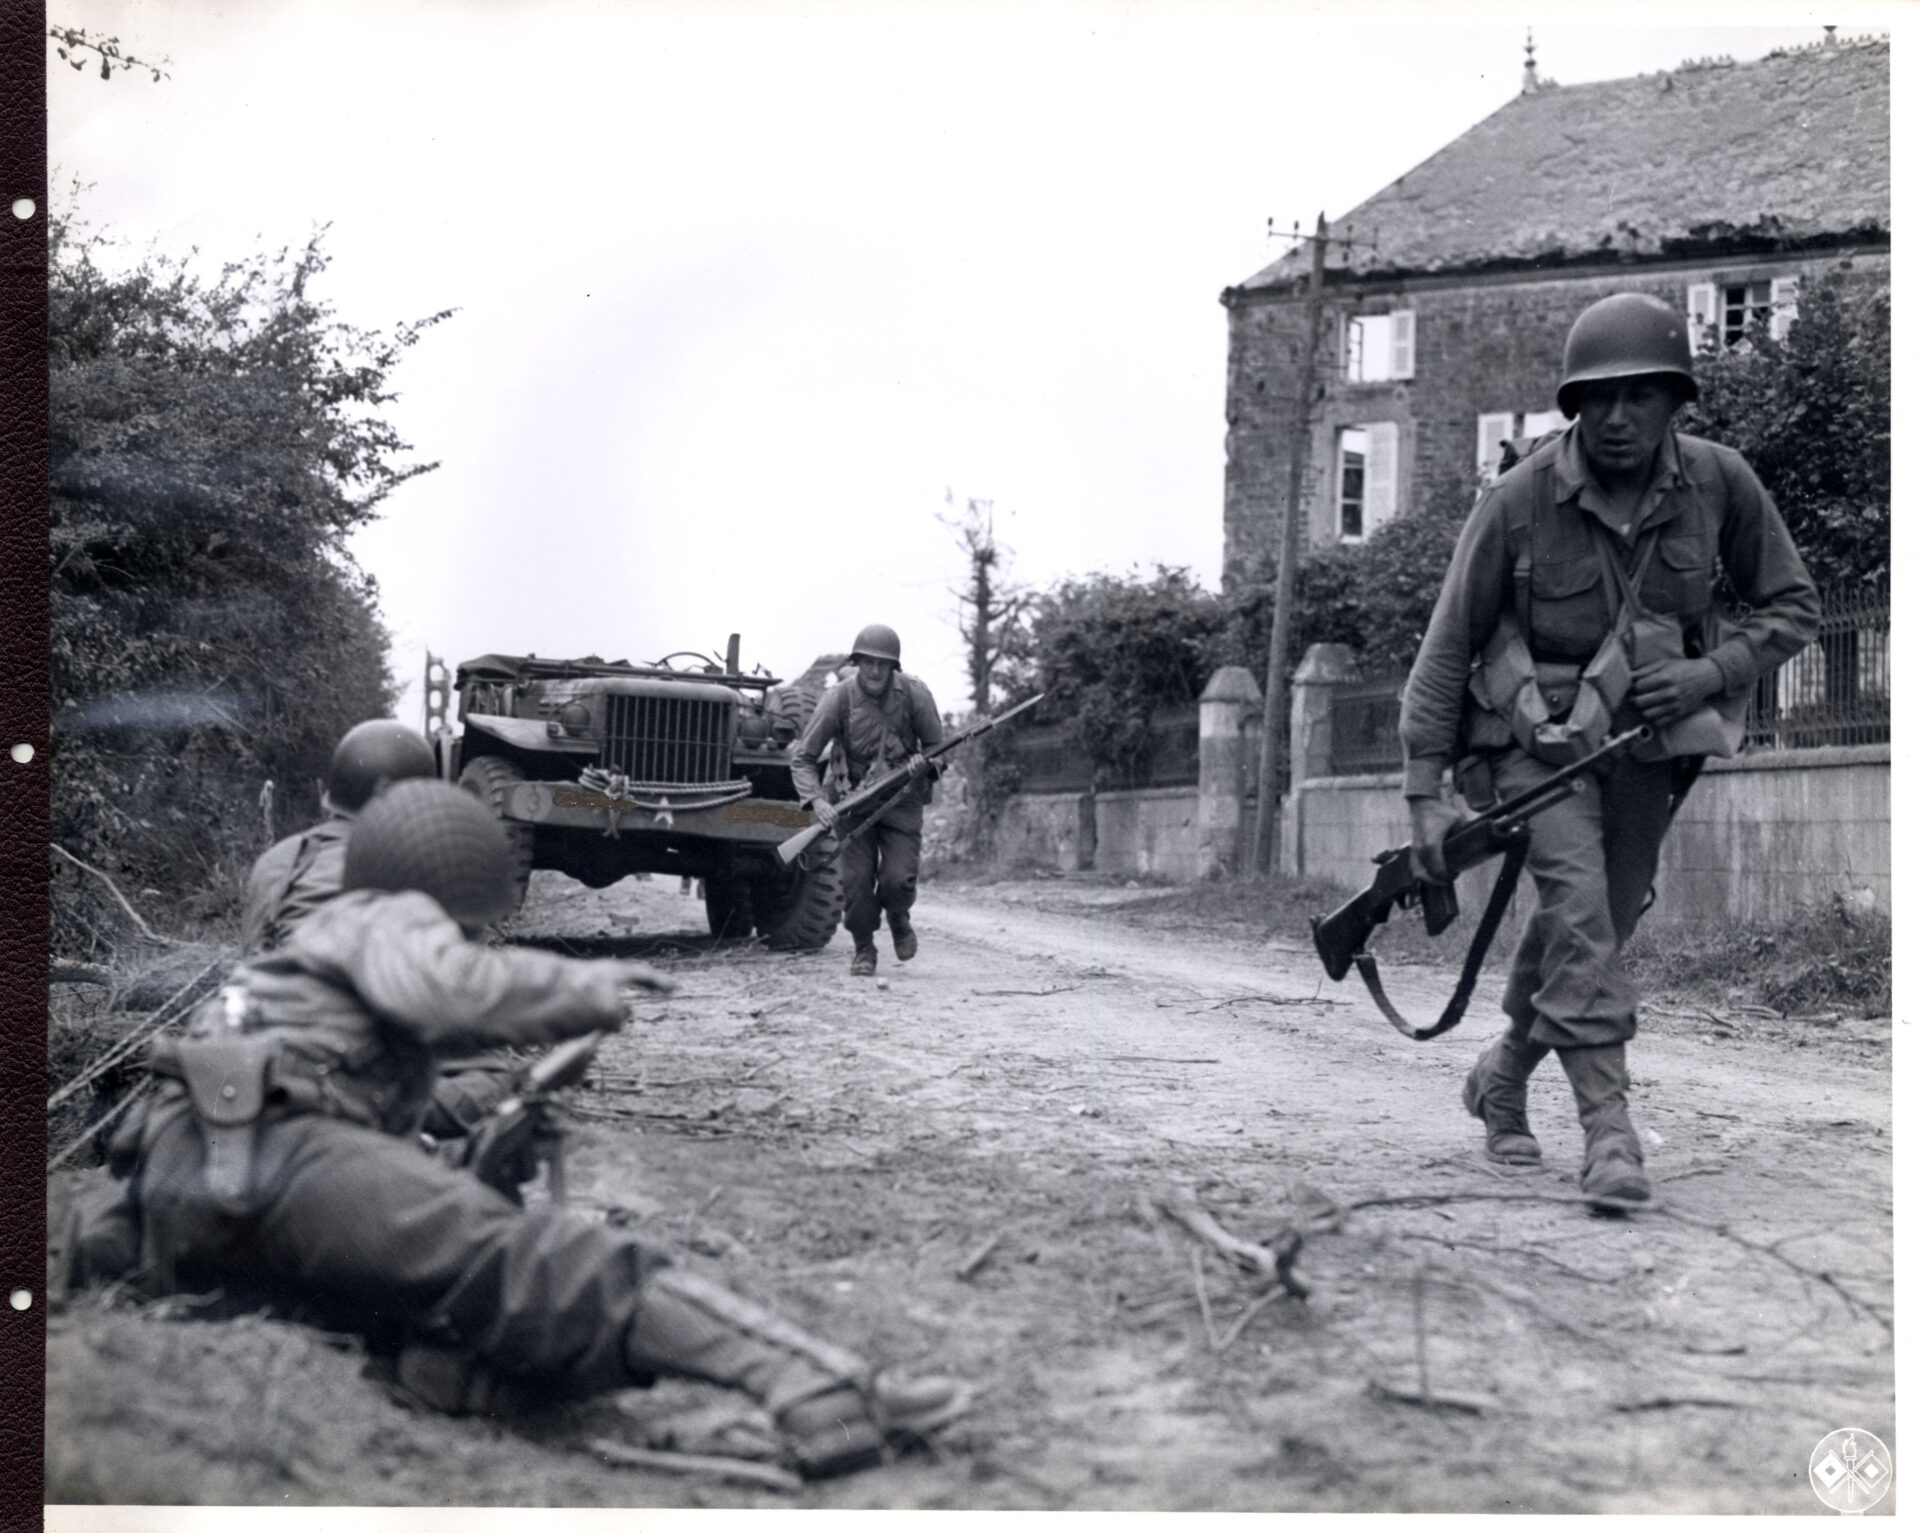 U.S. infantry troops entering a French town